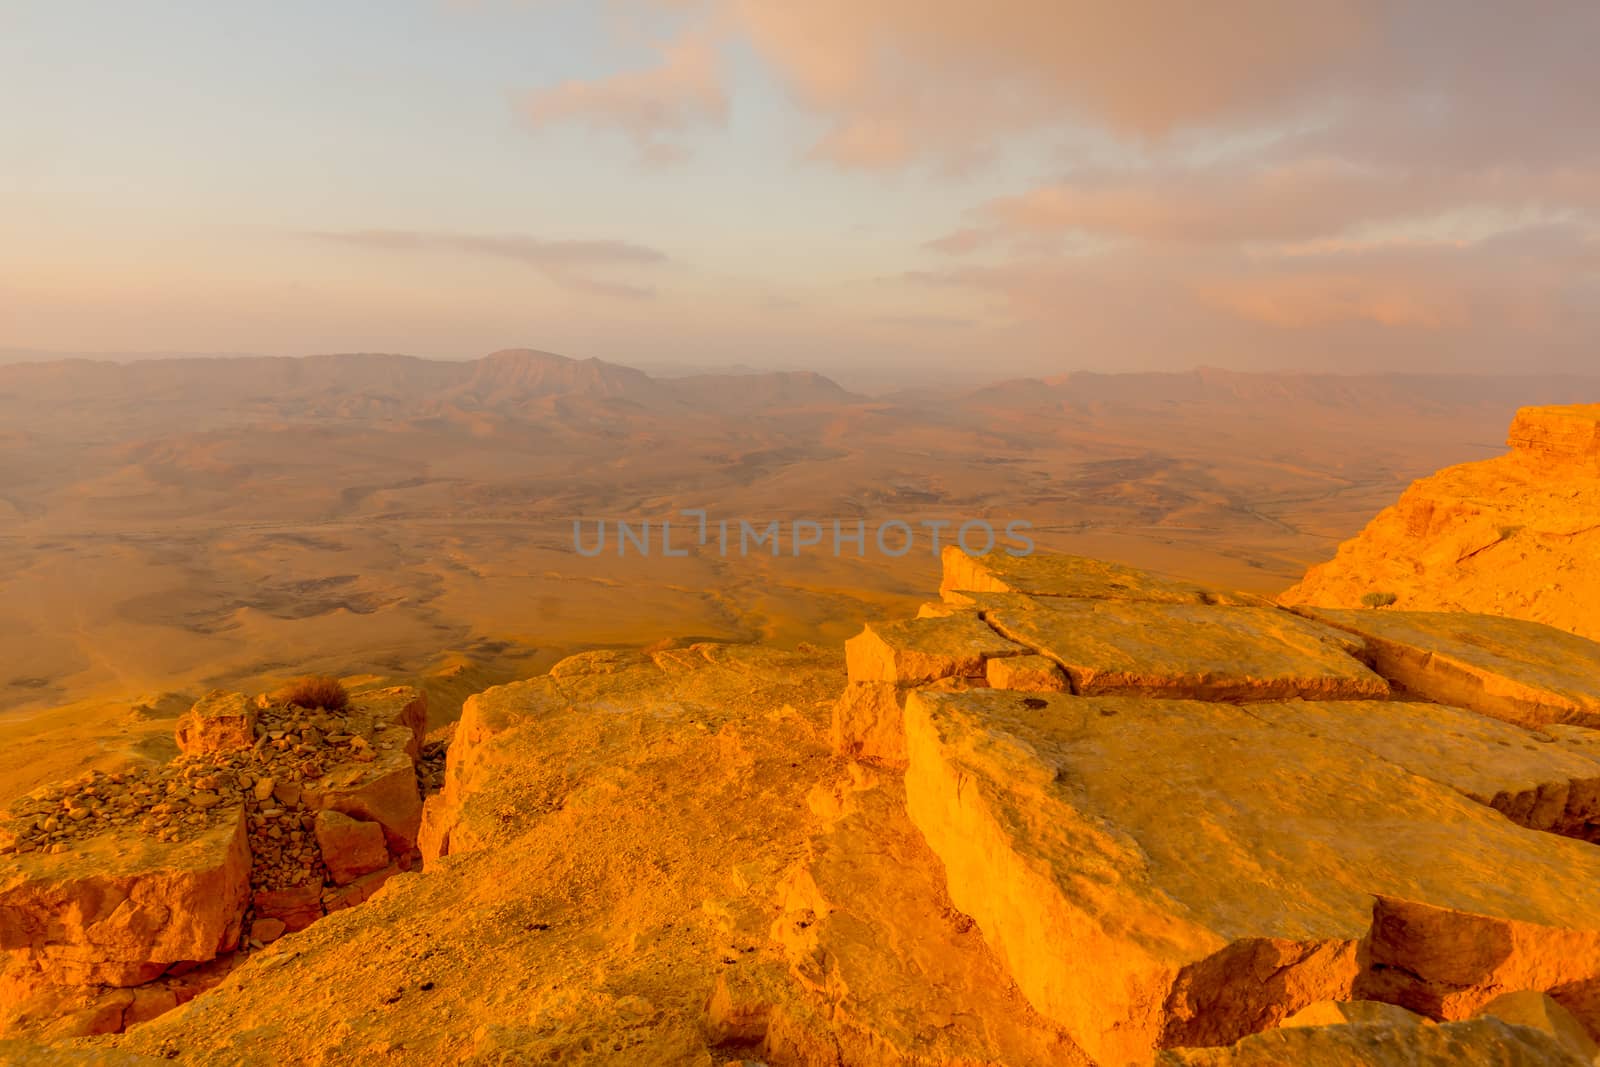 Sunrise view of cliffs and landscape in Makhtesh (crater) Ramon, the Negev Desert, Southern Israel